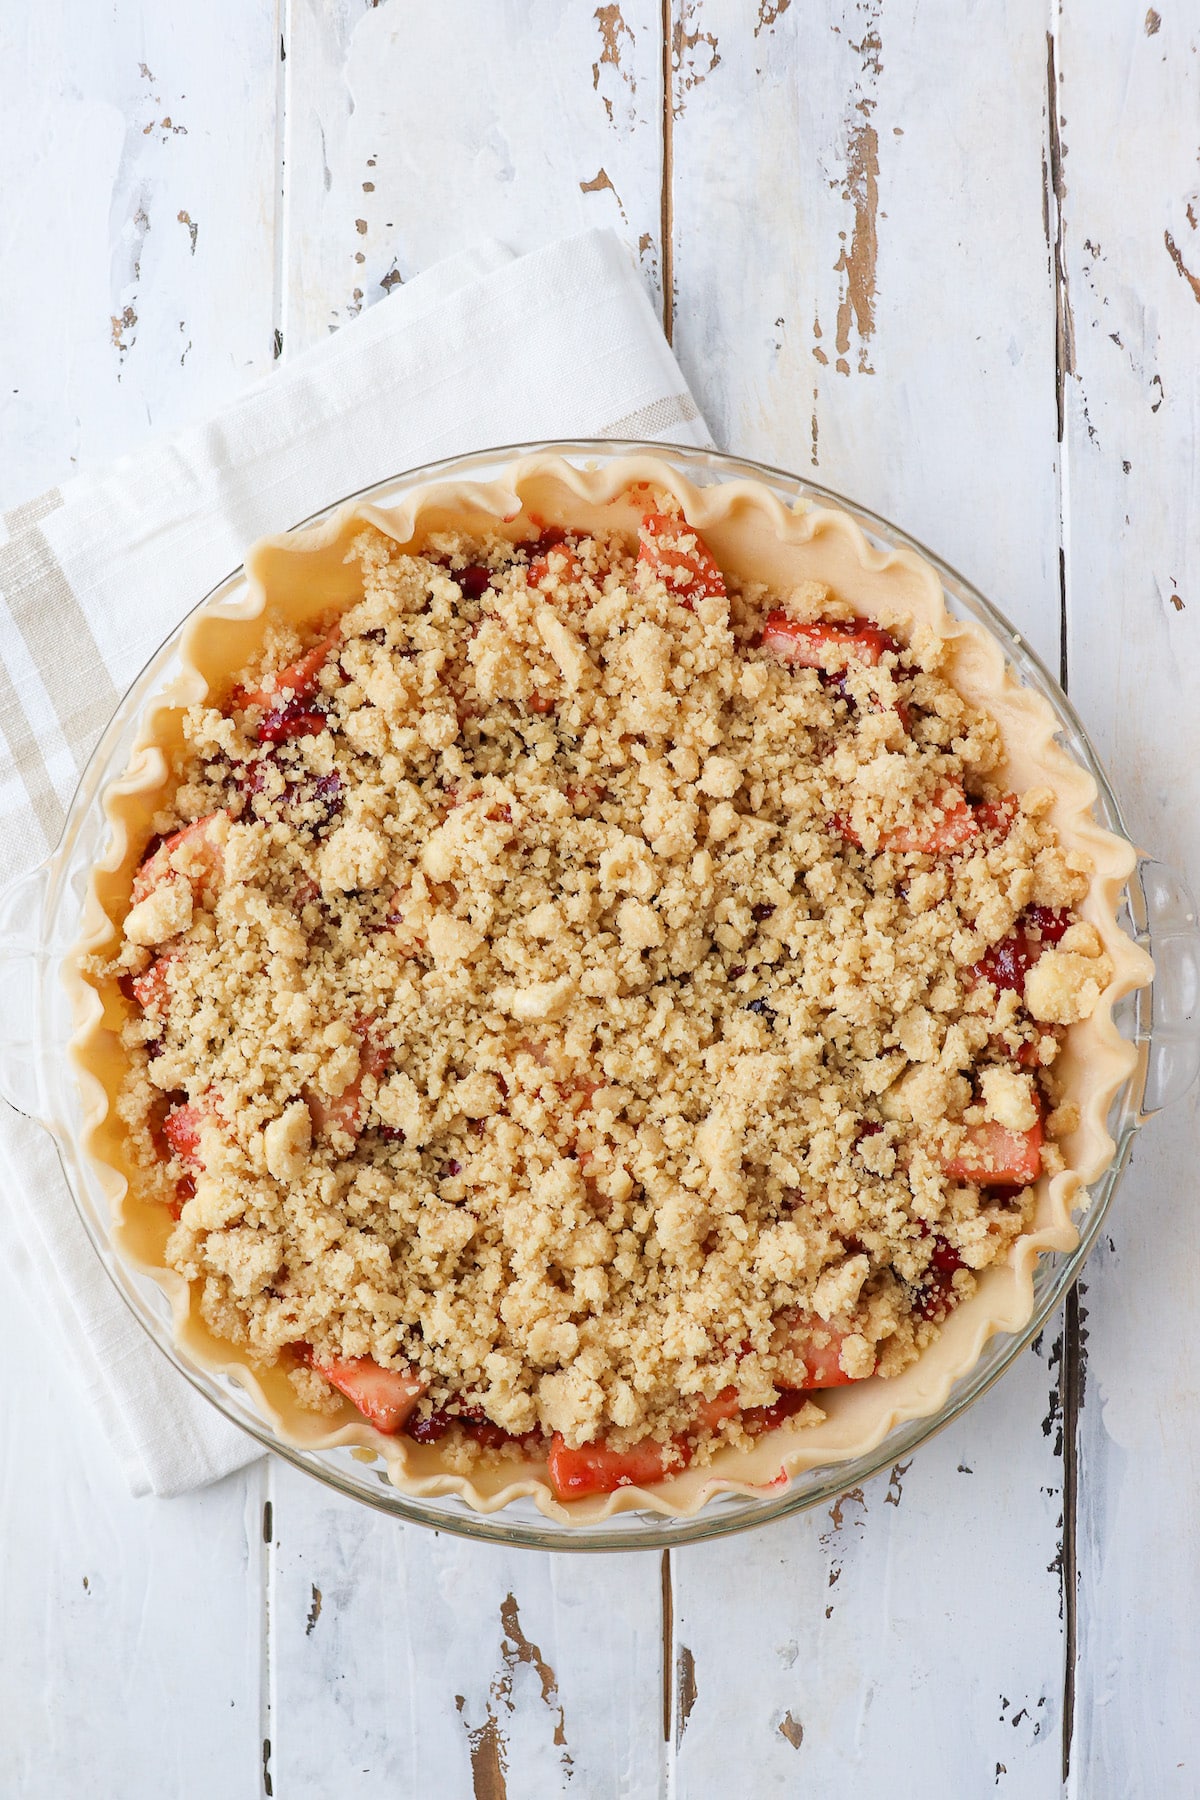 crumb topping on pie before baking